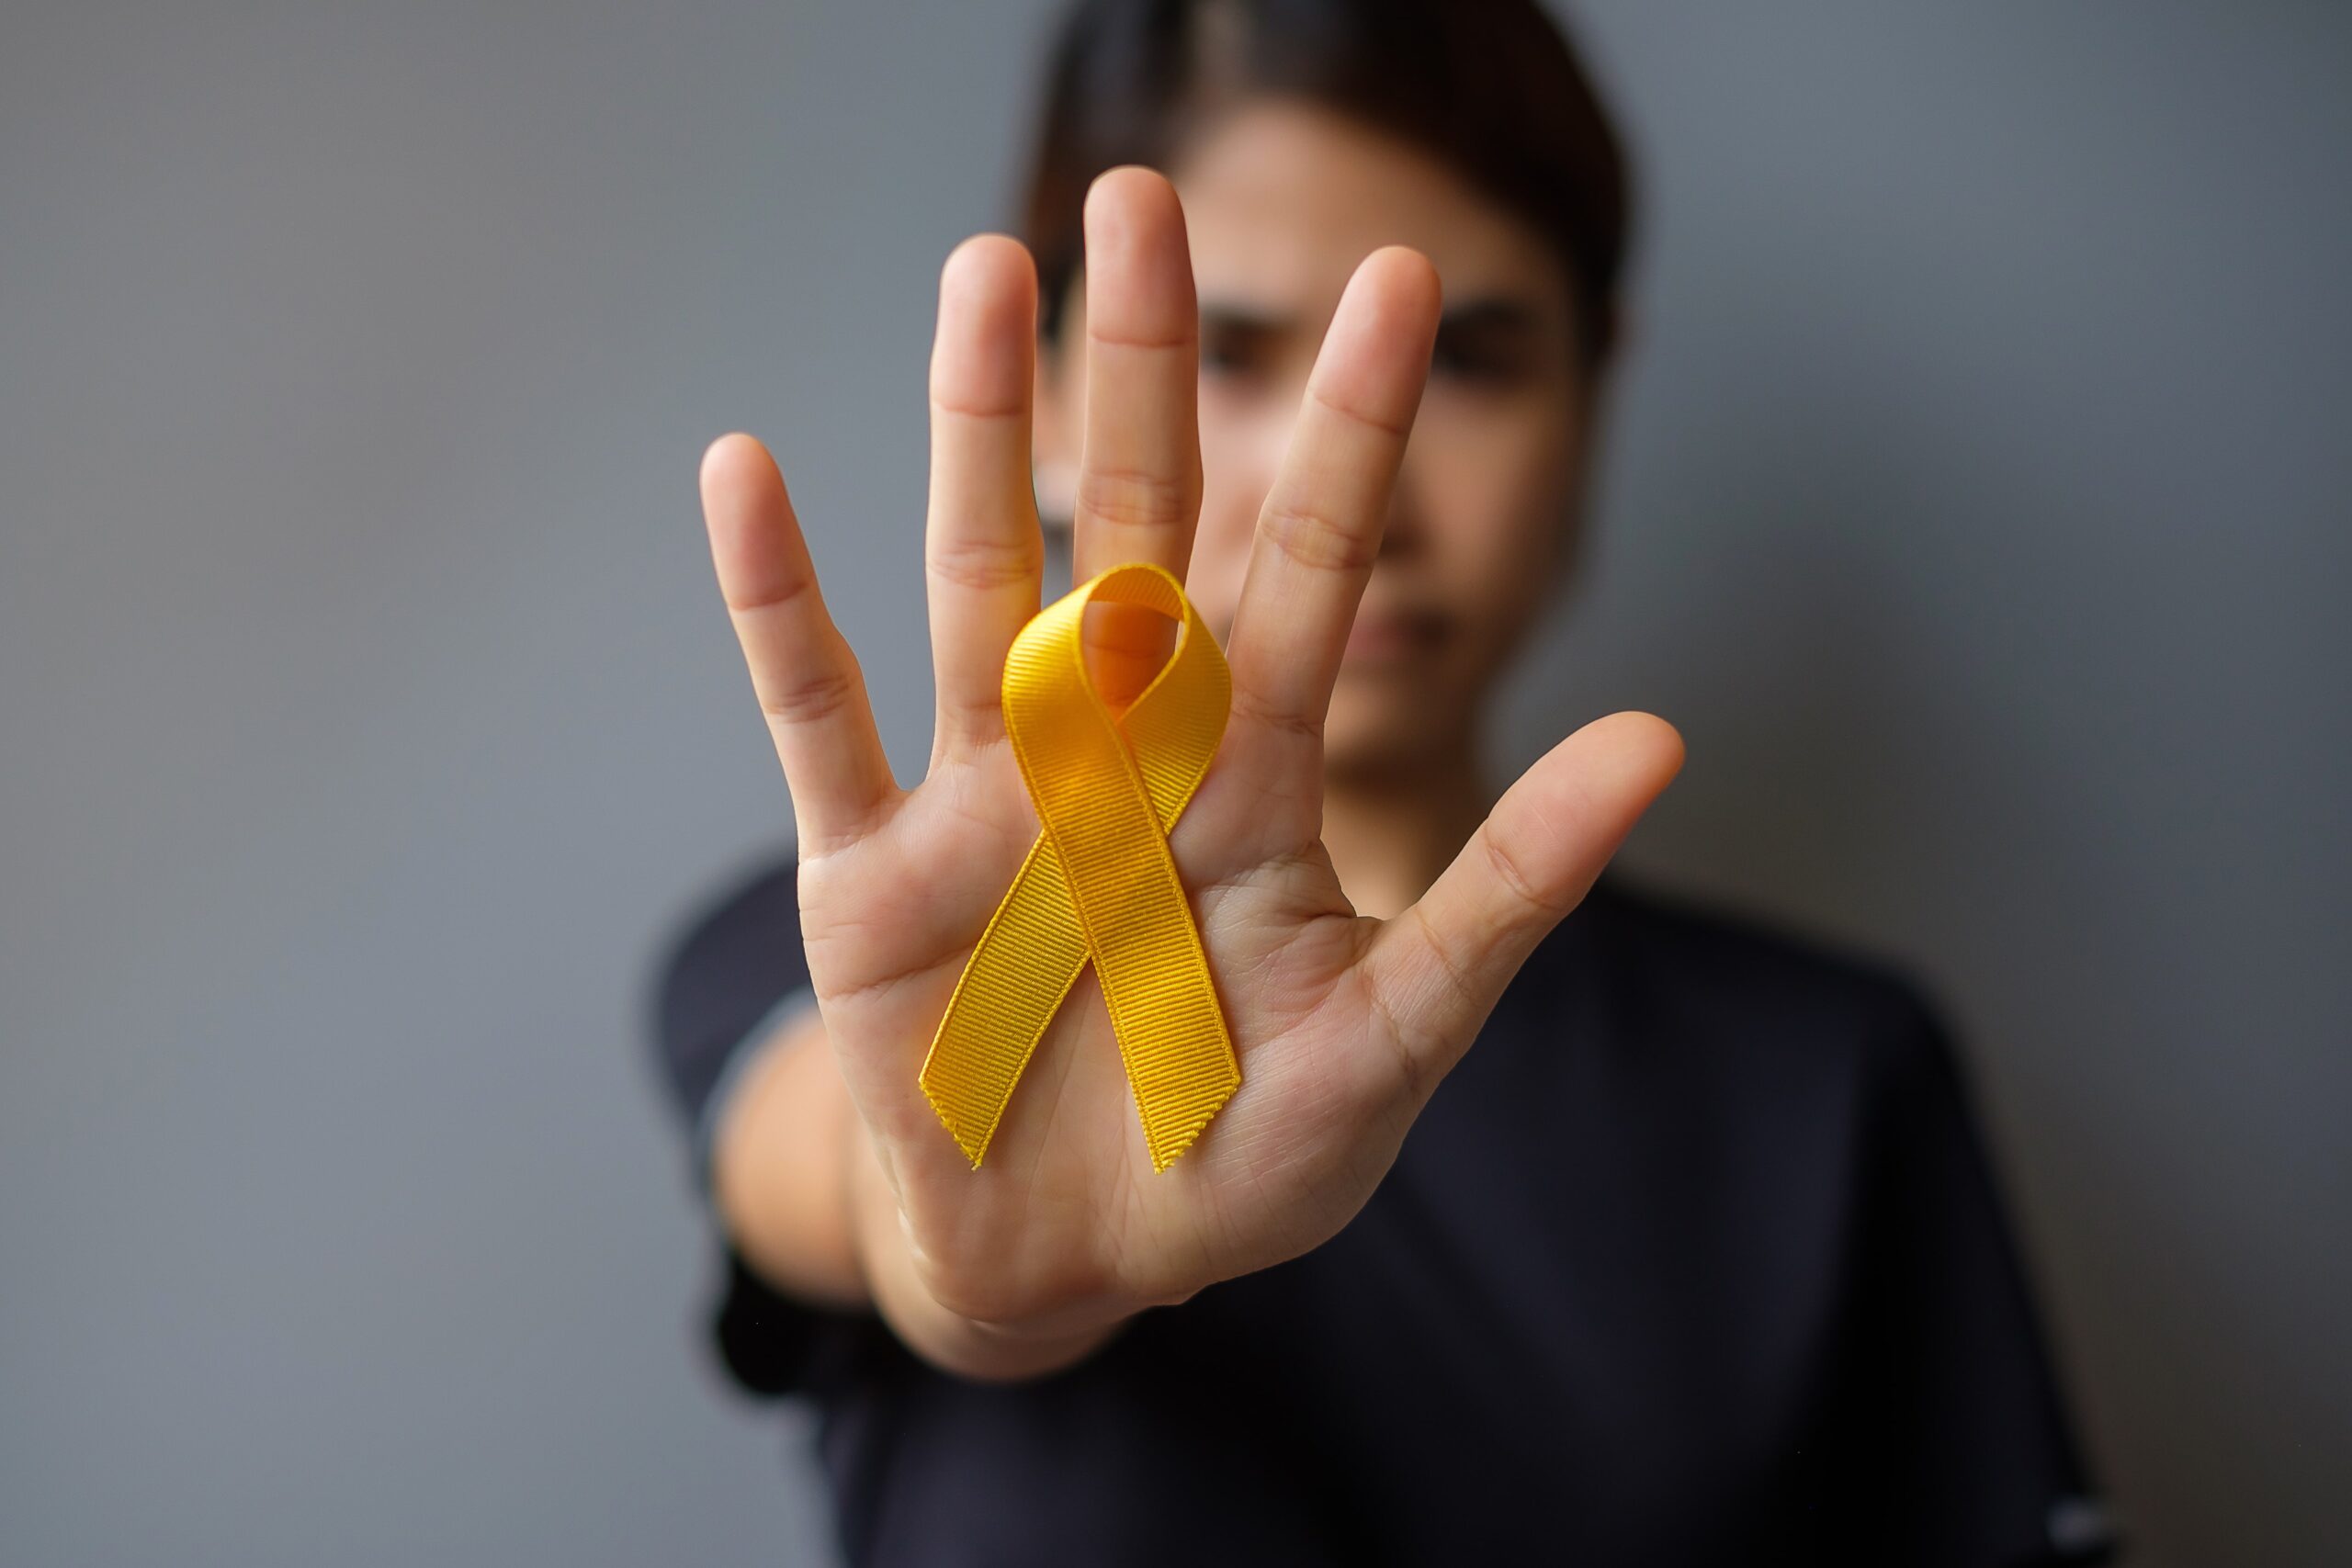 Individual holding up a suicide prevention and awareness ribbon.